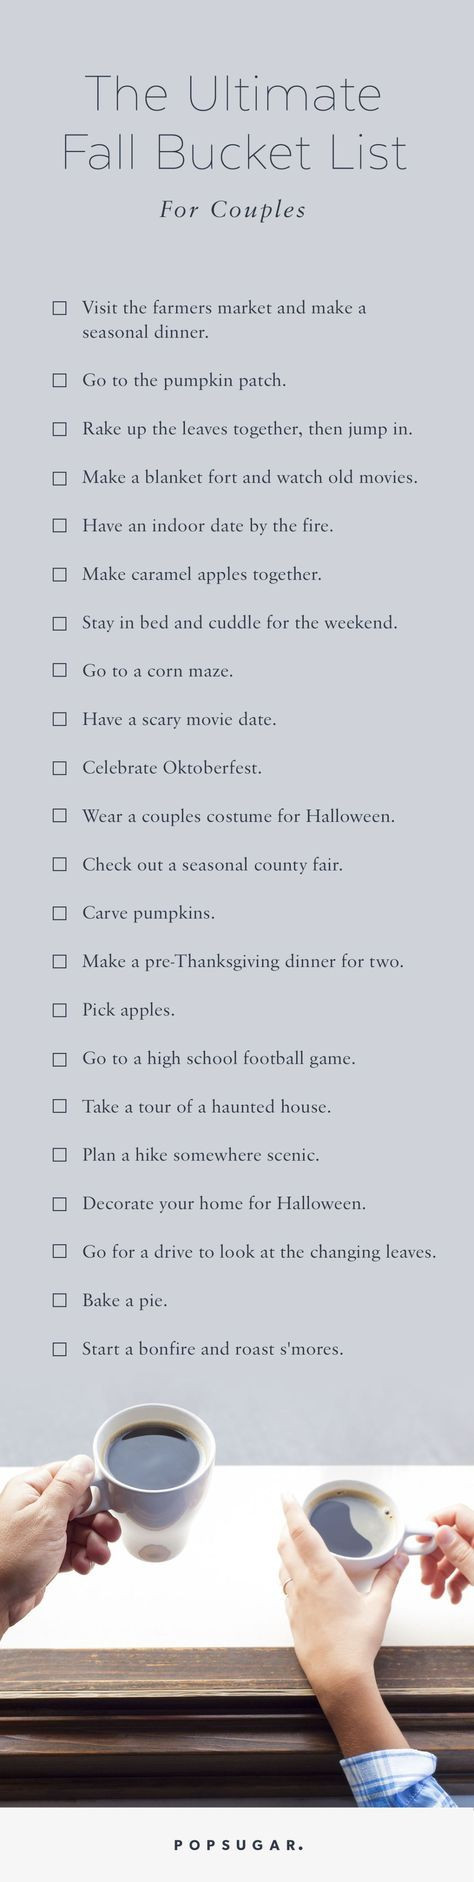 Activity Gift Ideas For Couples
 The Ultimate Fall Couples Bucket List